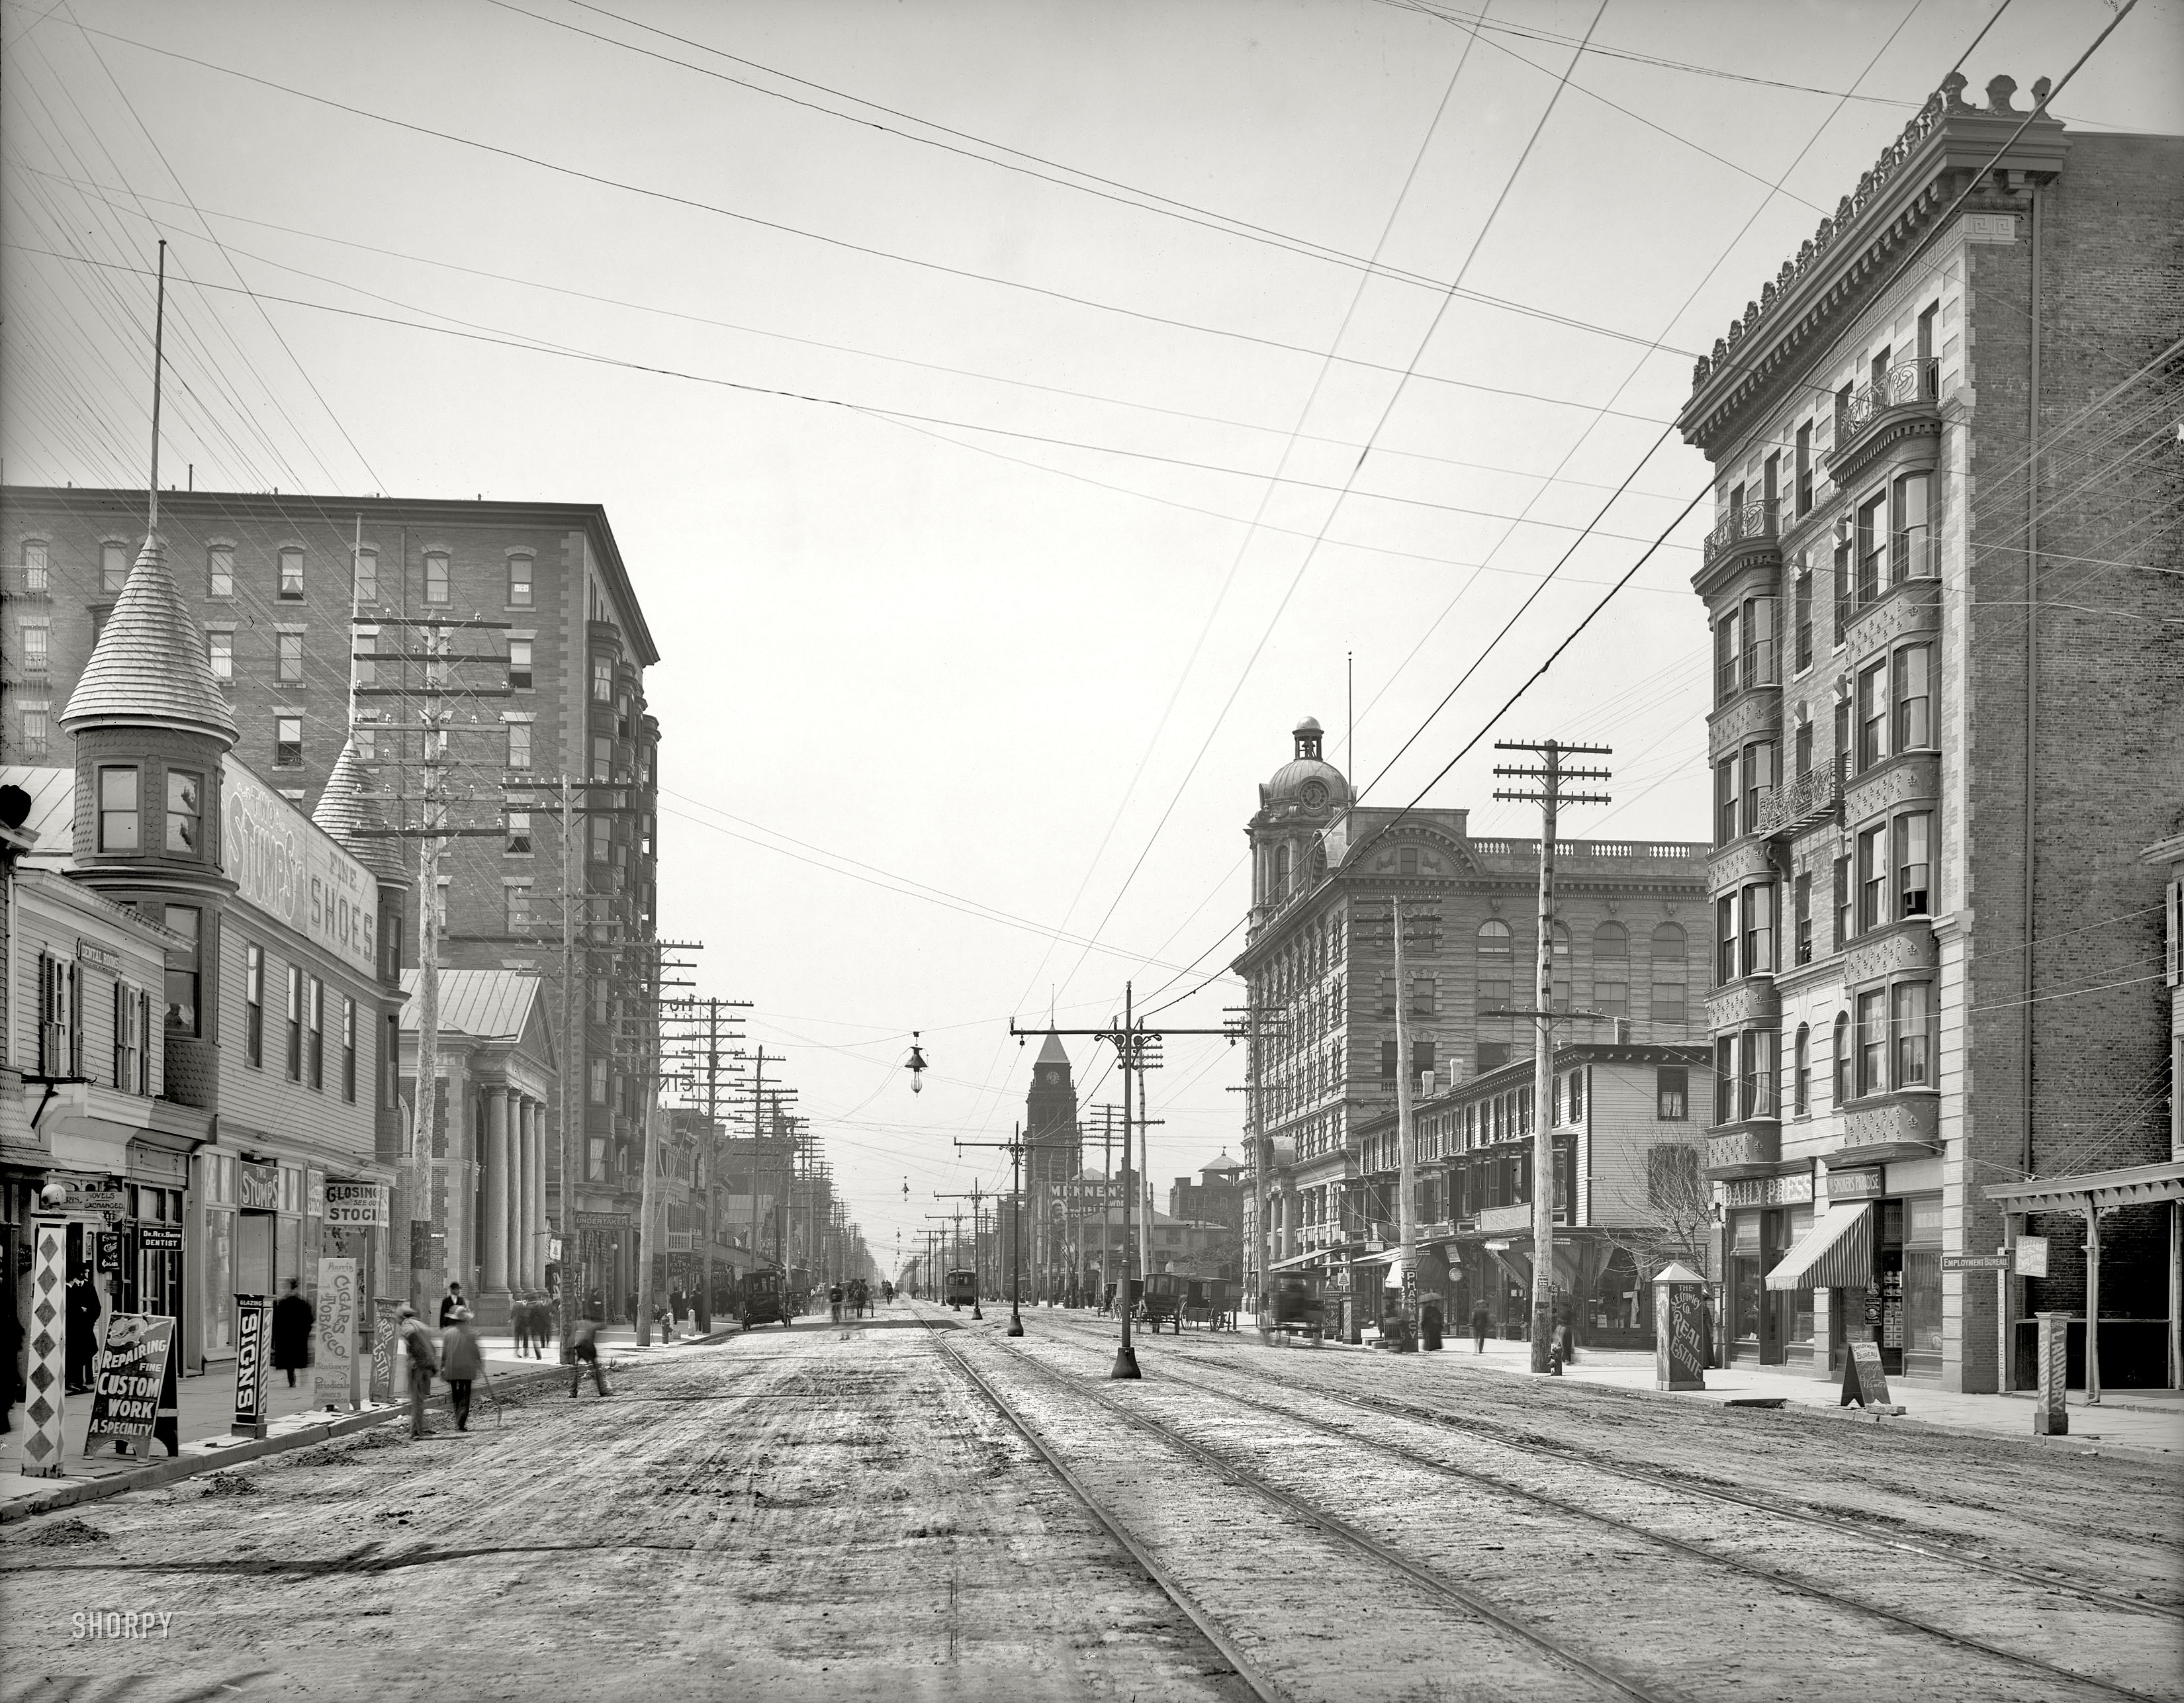 Atlantic City, New Jersey, circa 1905. "Atlantic Avenue." Meet you in front of Two Stumps in an hour. Detroit Publishing Co. glass negative. View full size.